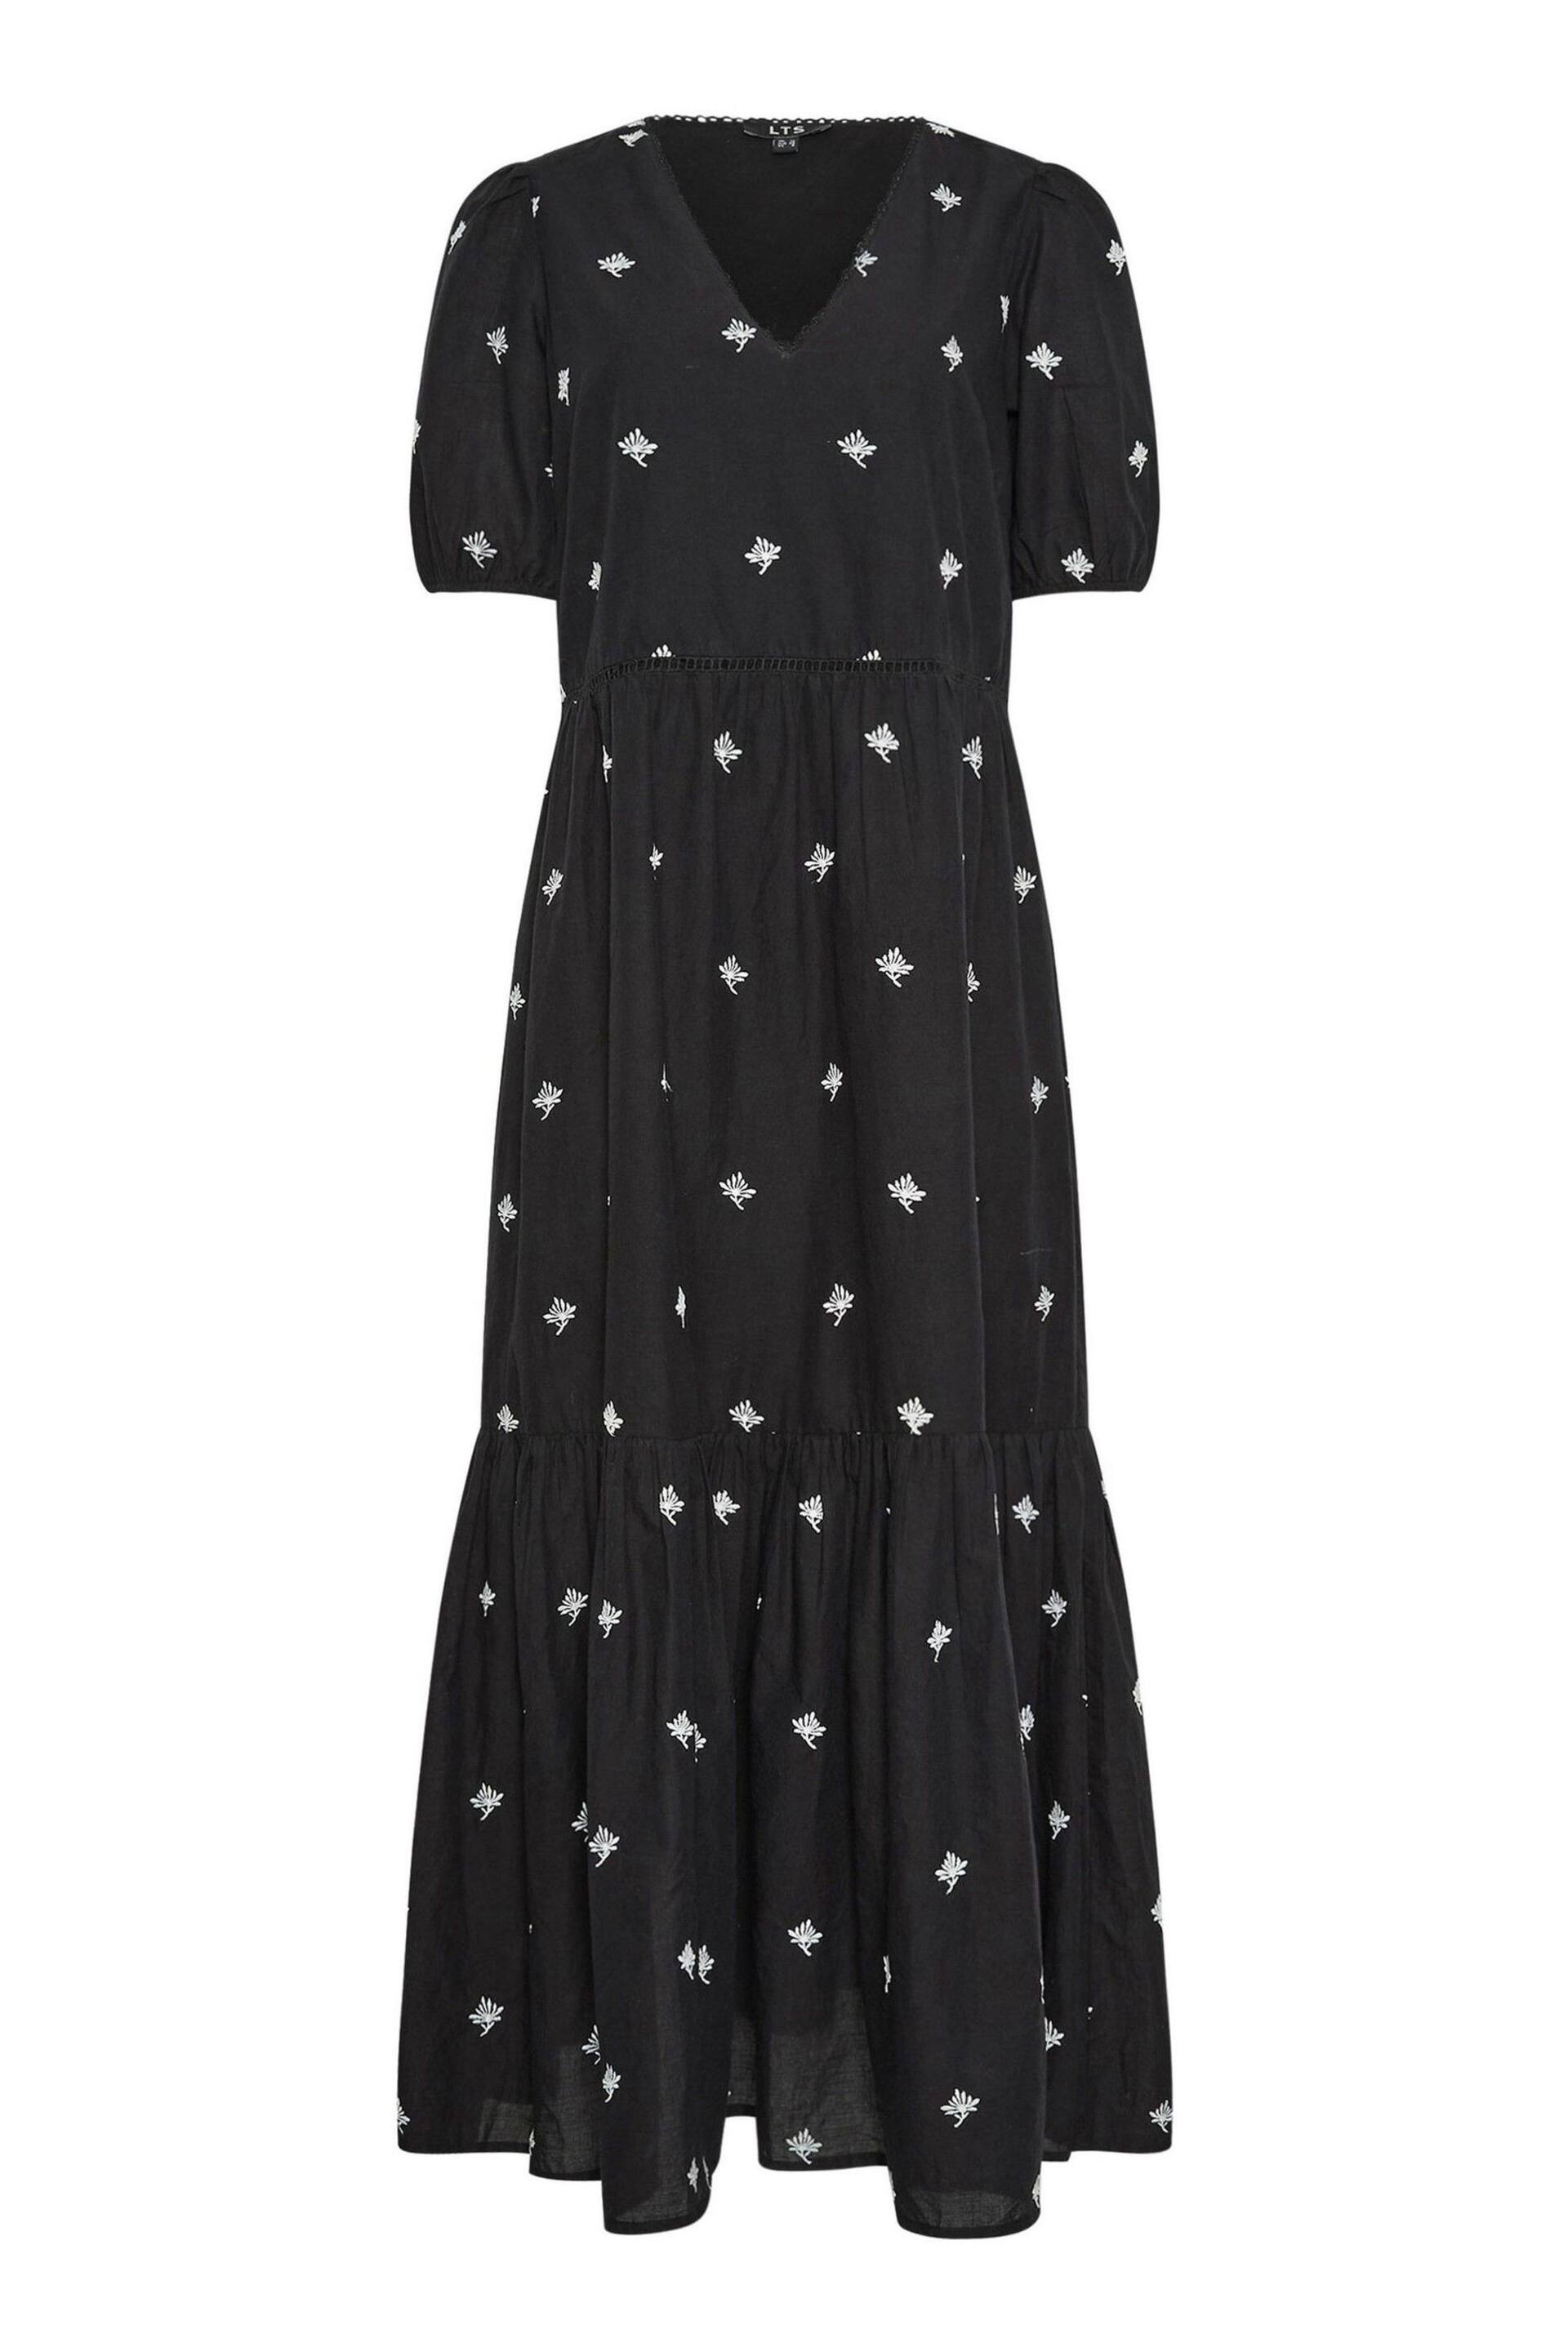 Long Tall Sally Black Embroidered V-Neck Tiered Dress - Image 6 of 6